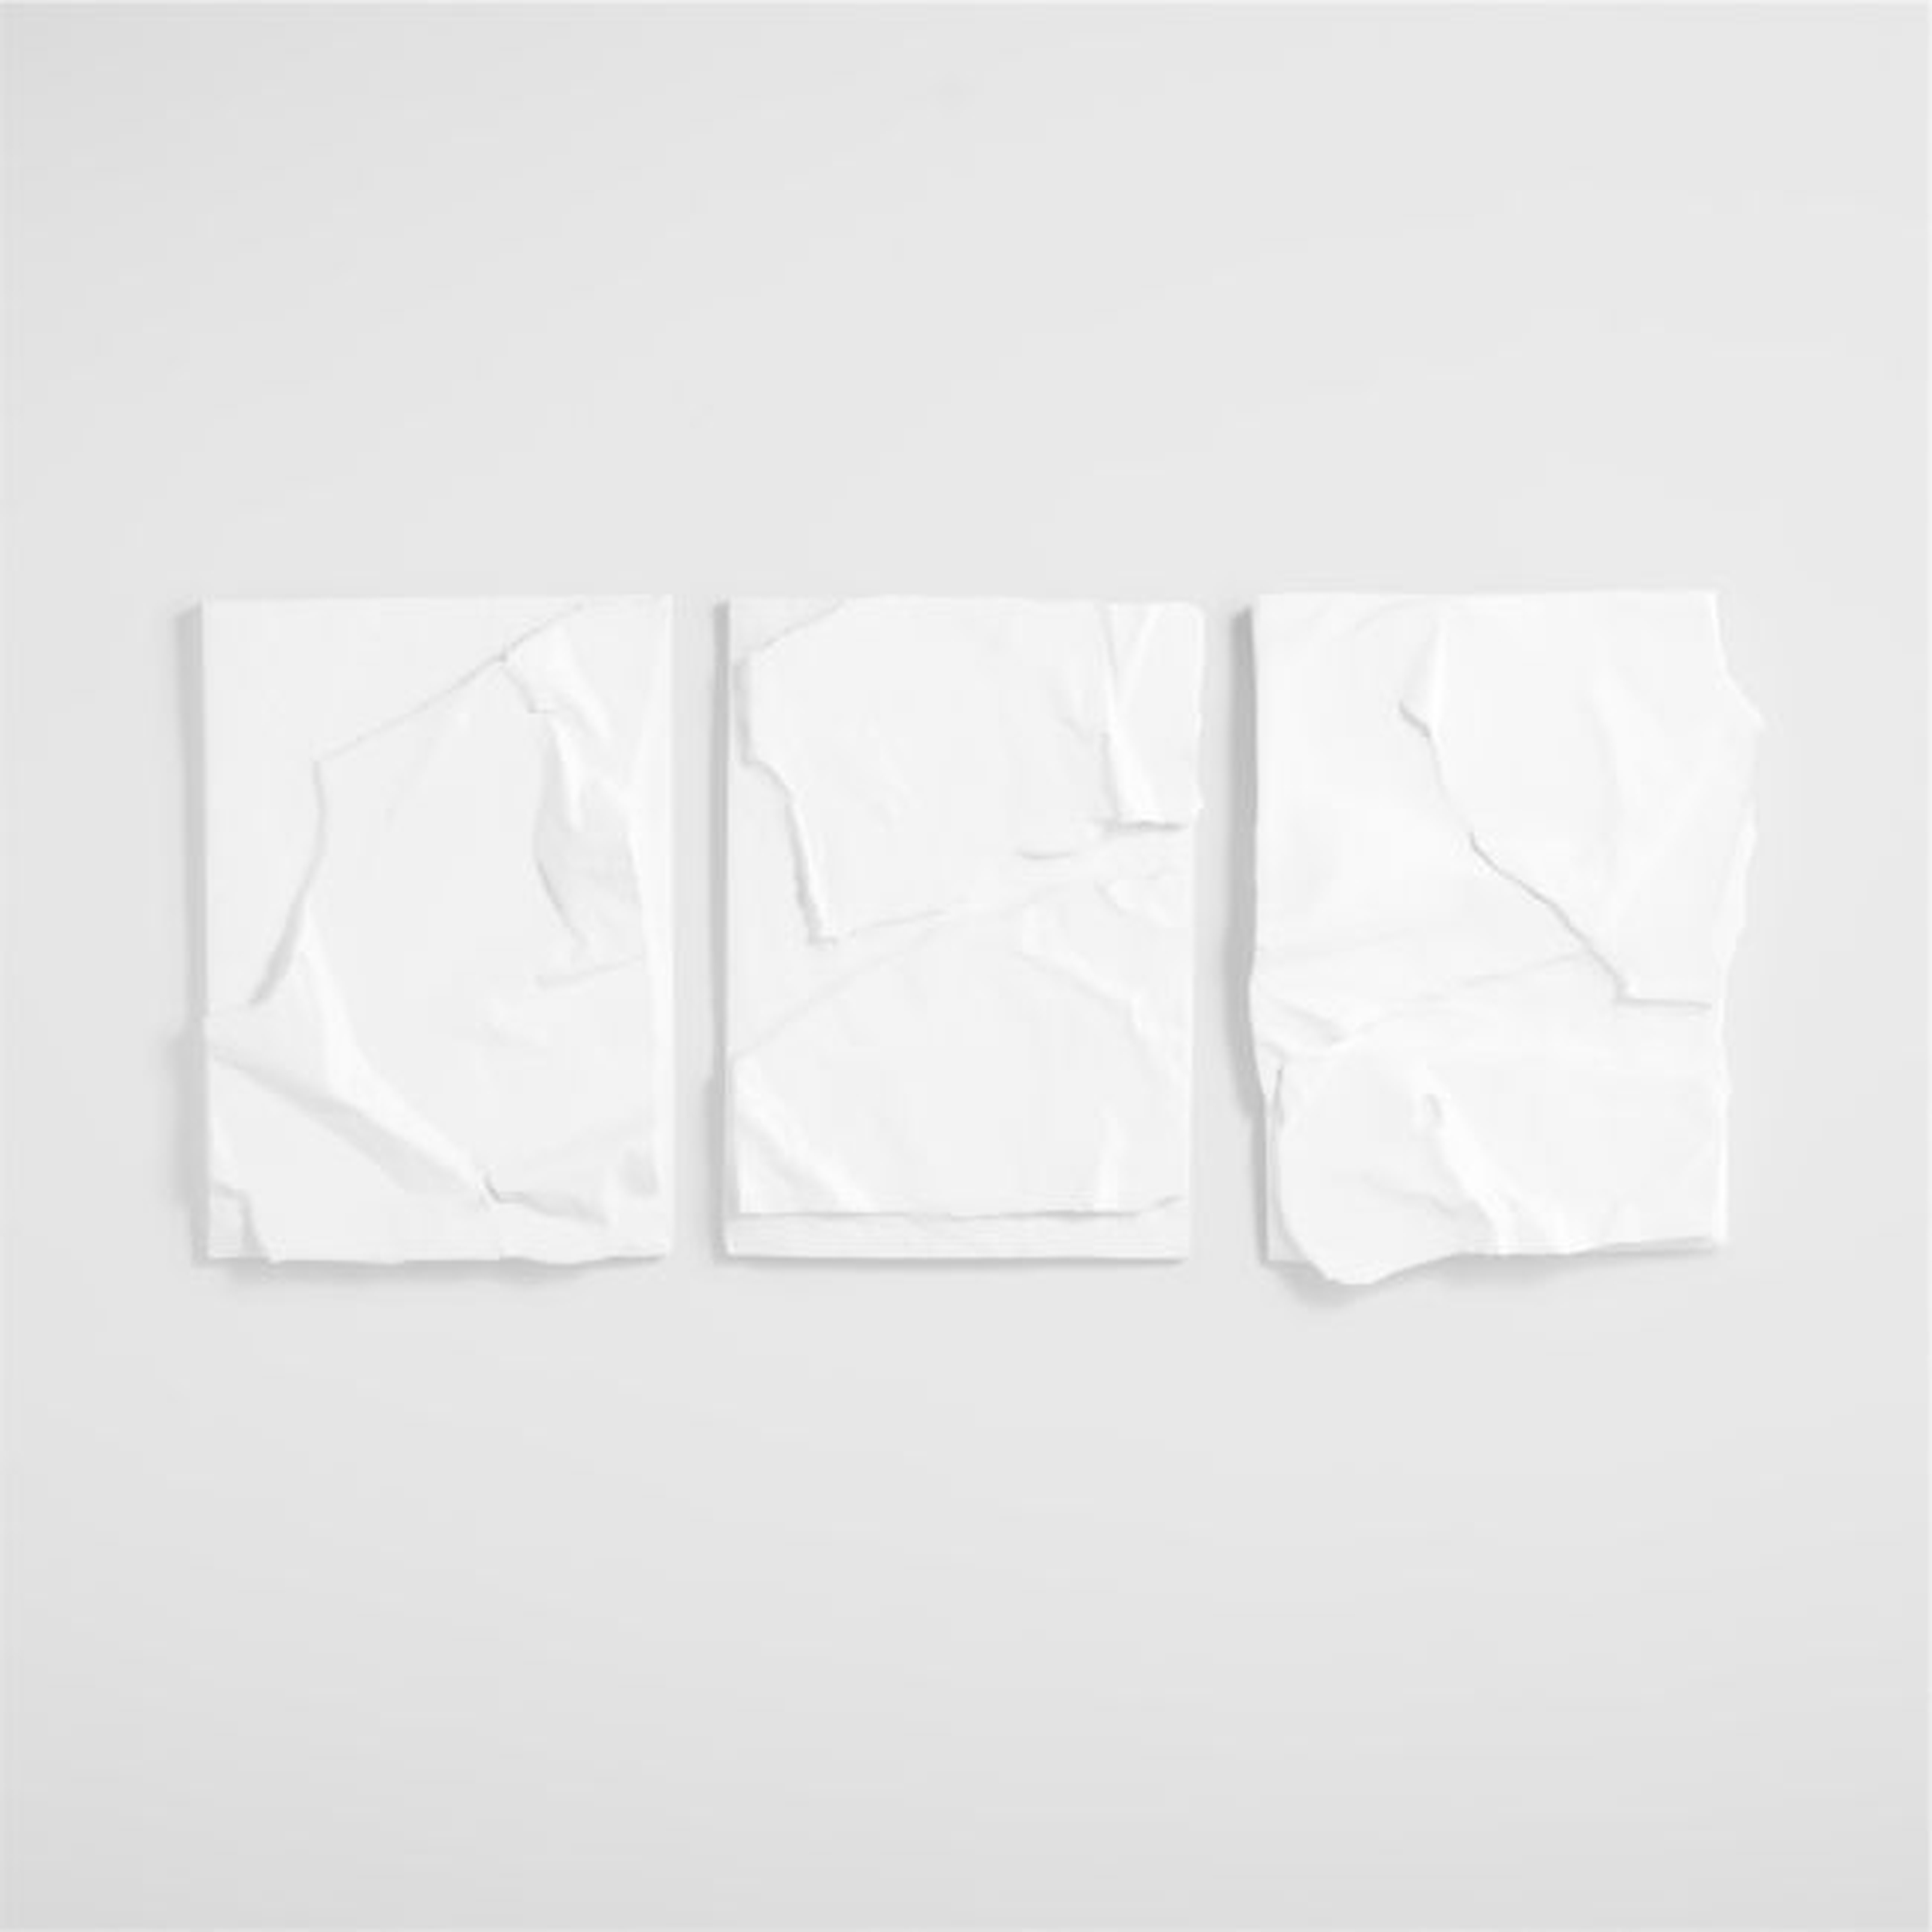 'Nereus' Plaster Wall Art Panels by Alexis Gourguechon , Set of 3 - Crate and Barrel